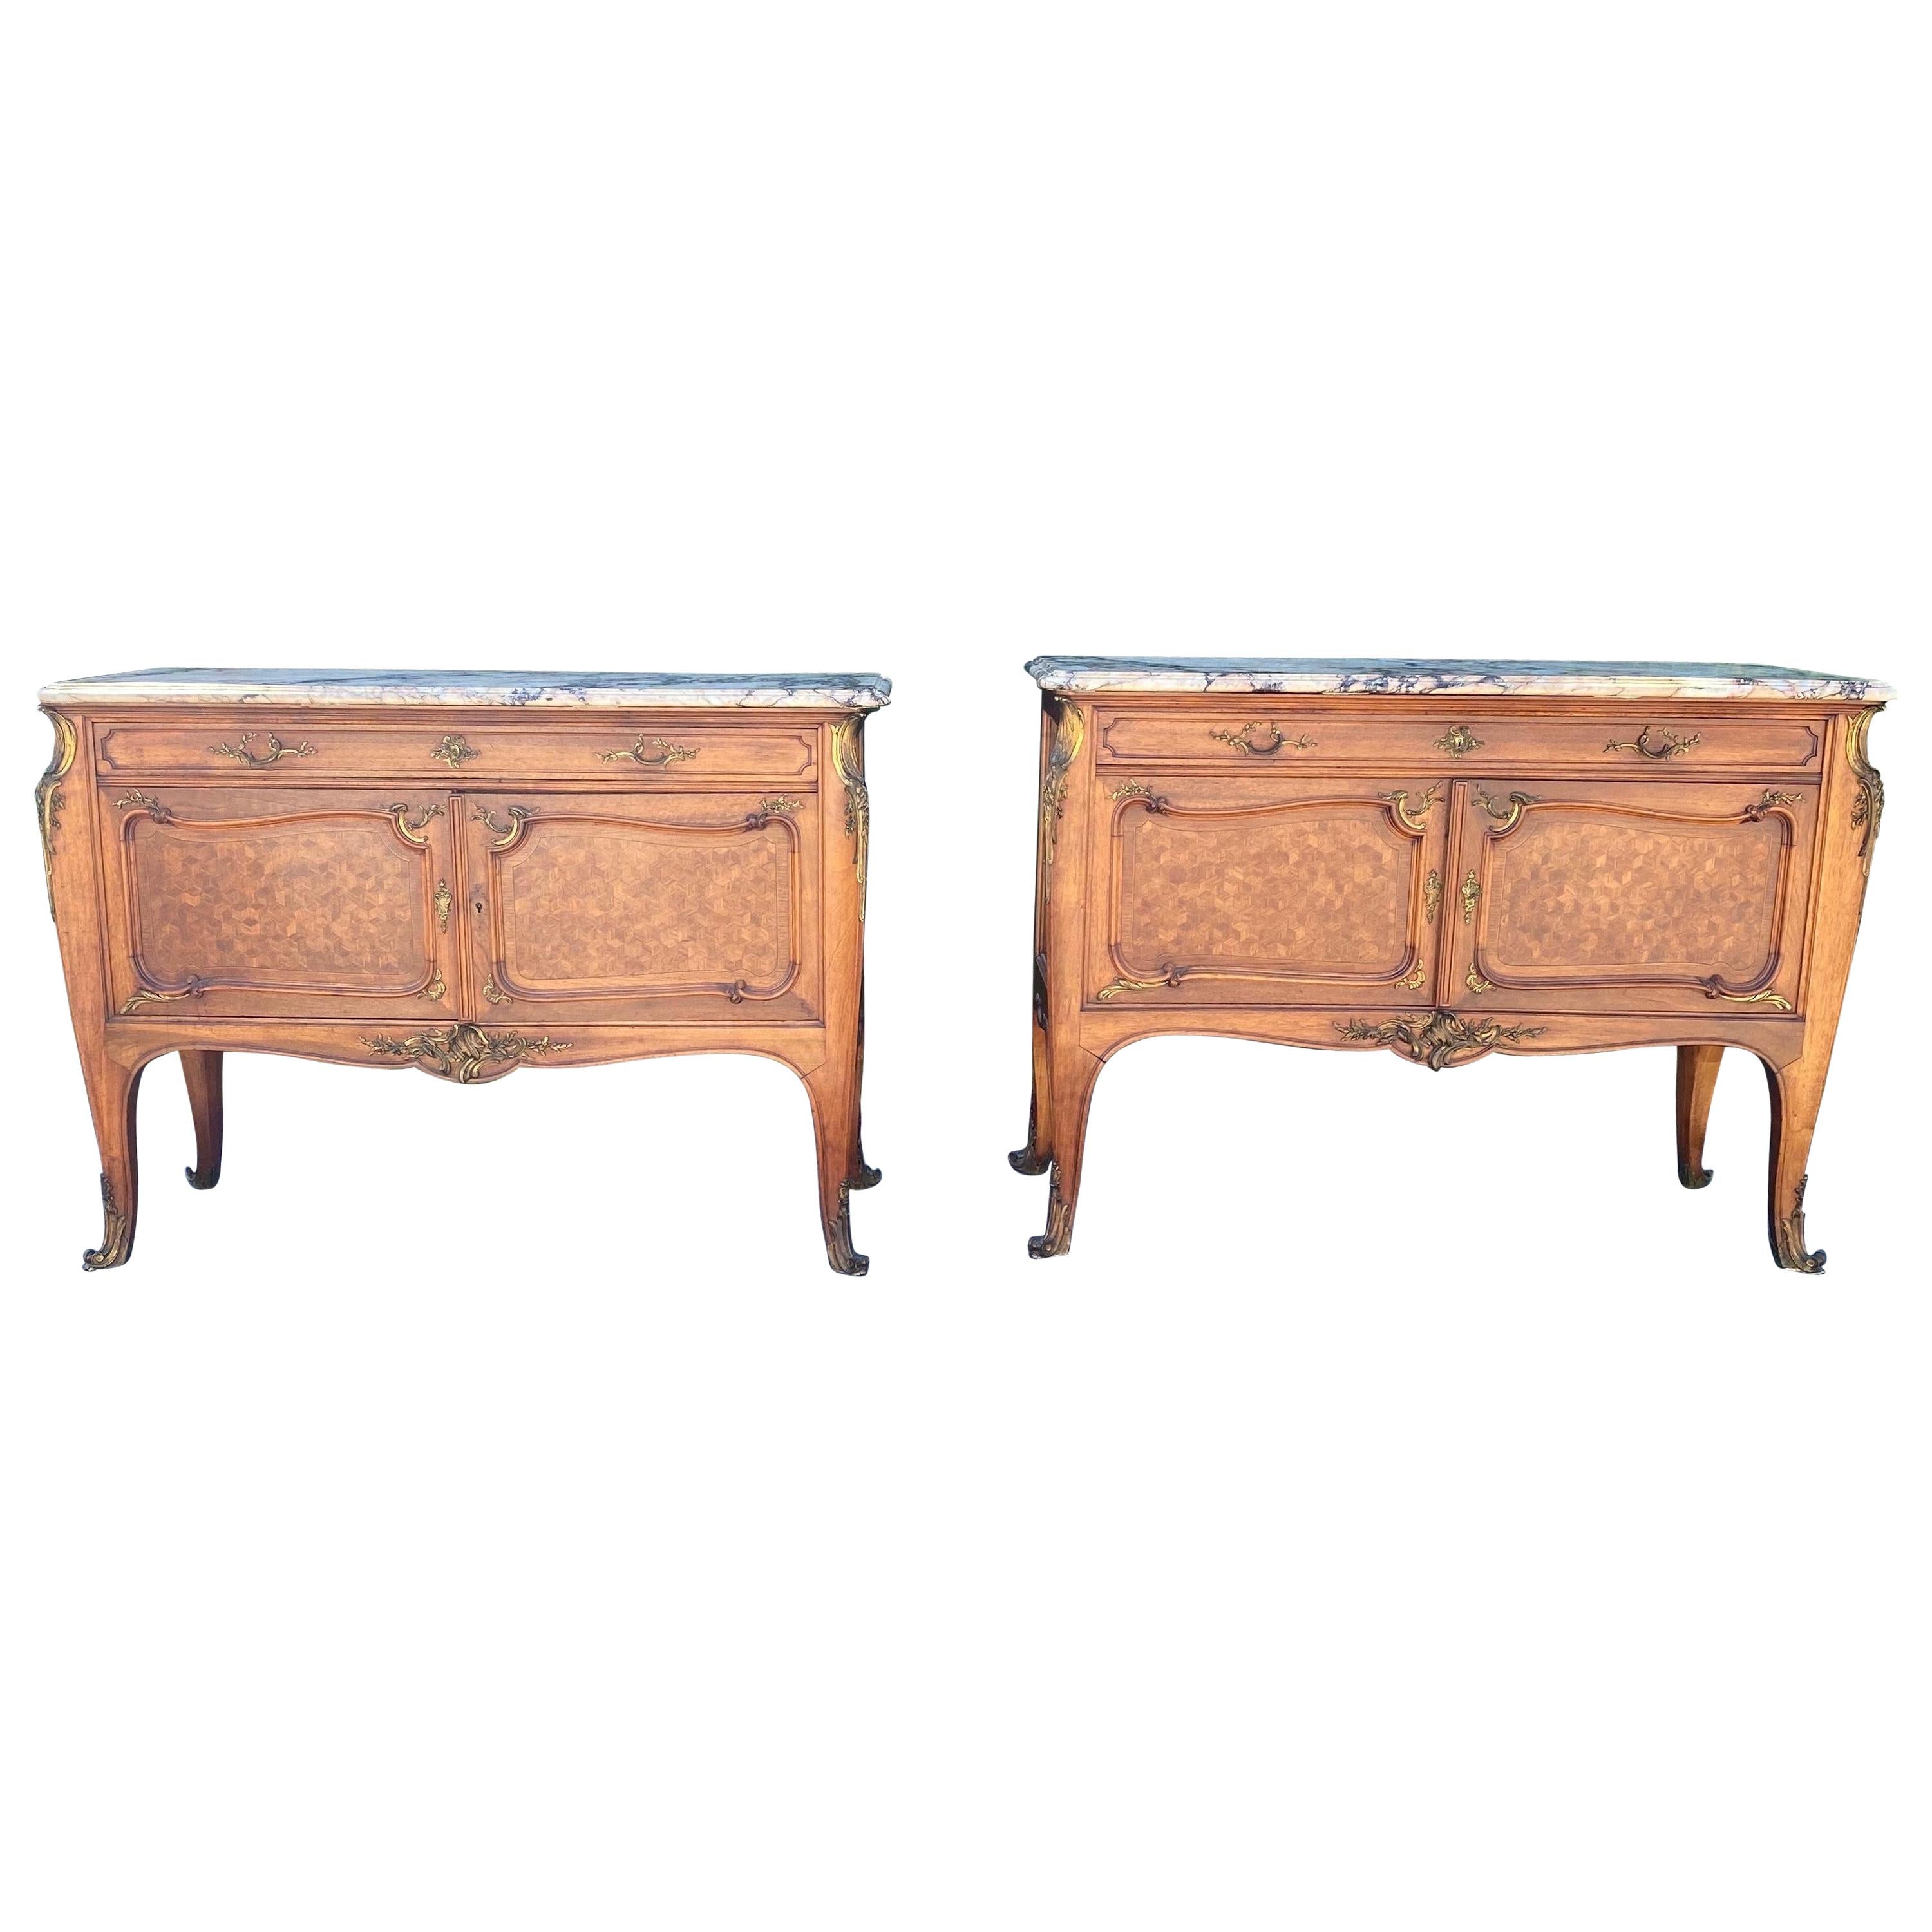 Pair of Singed Linke Bronze Mounted Parquetry Commodes, Francois Linke, Paris FR For Sale